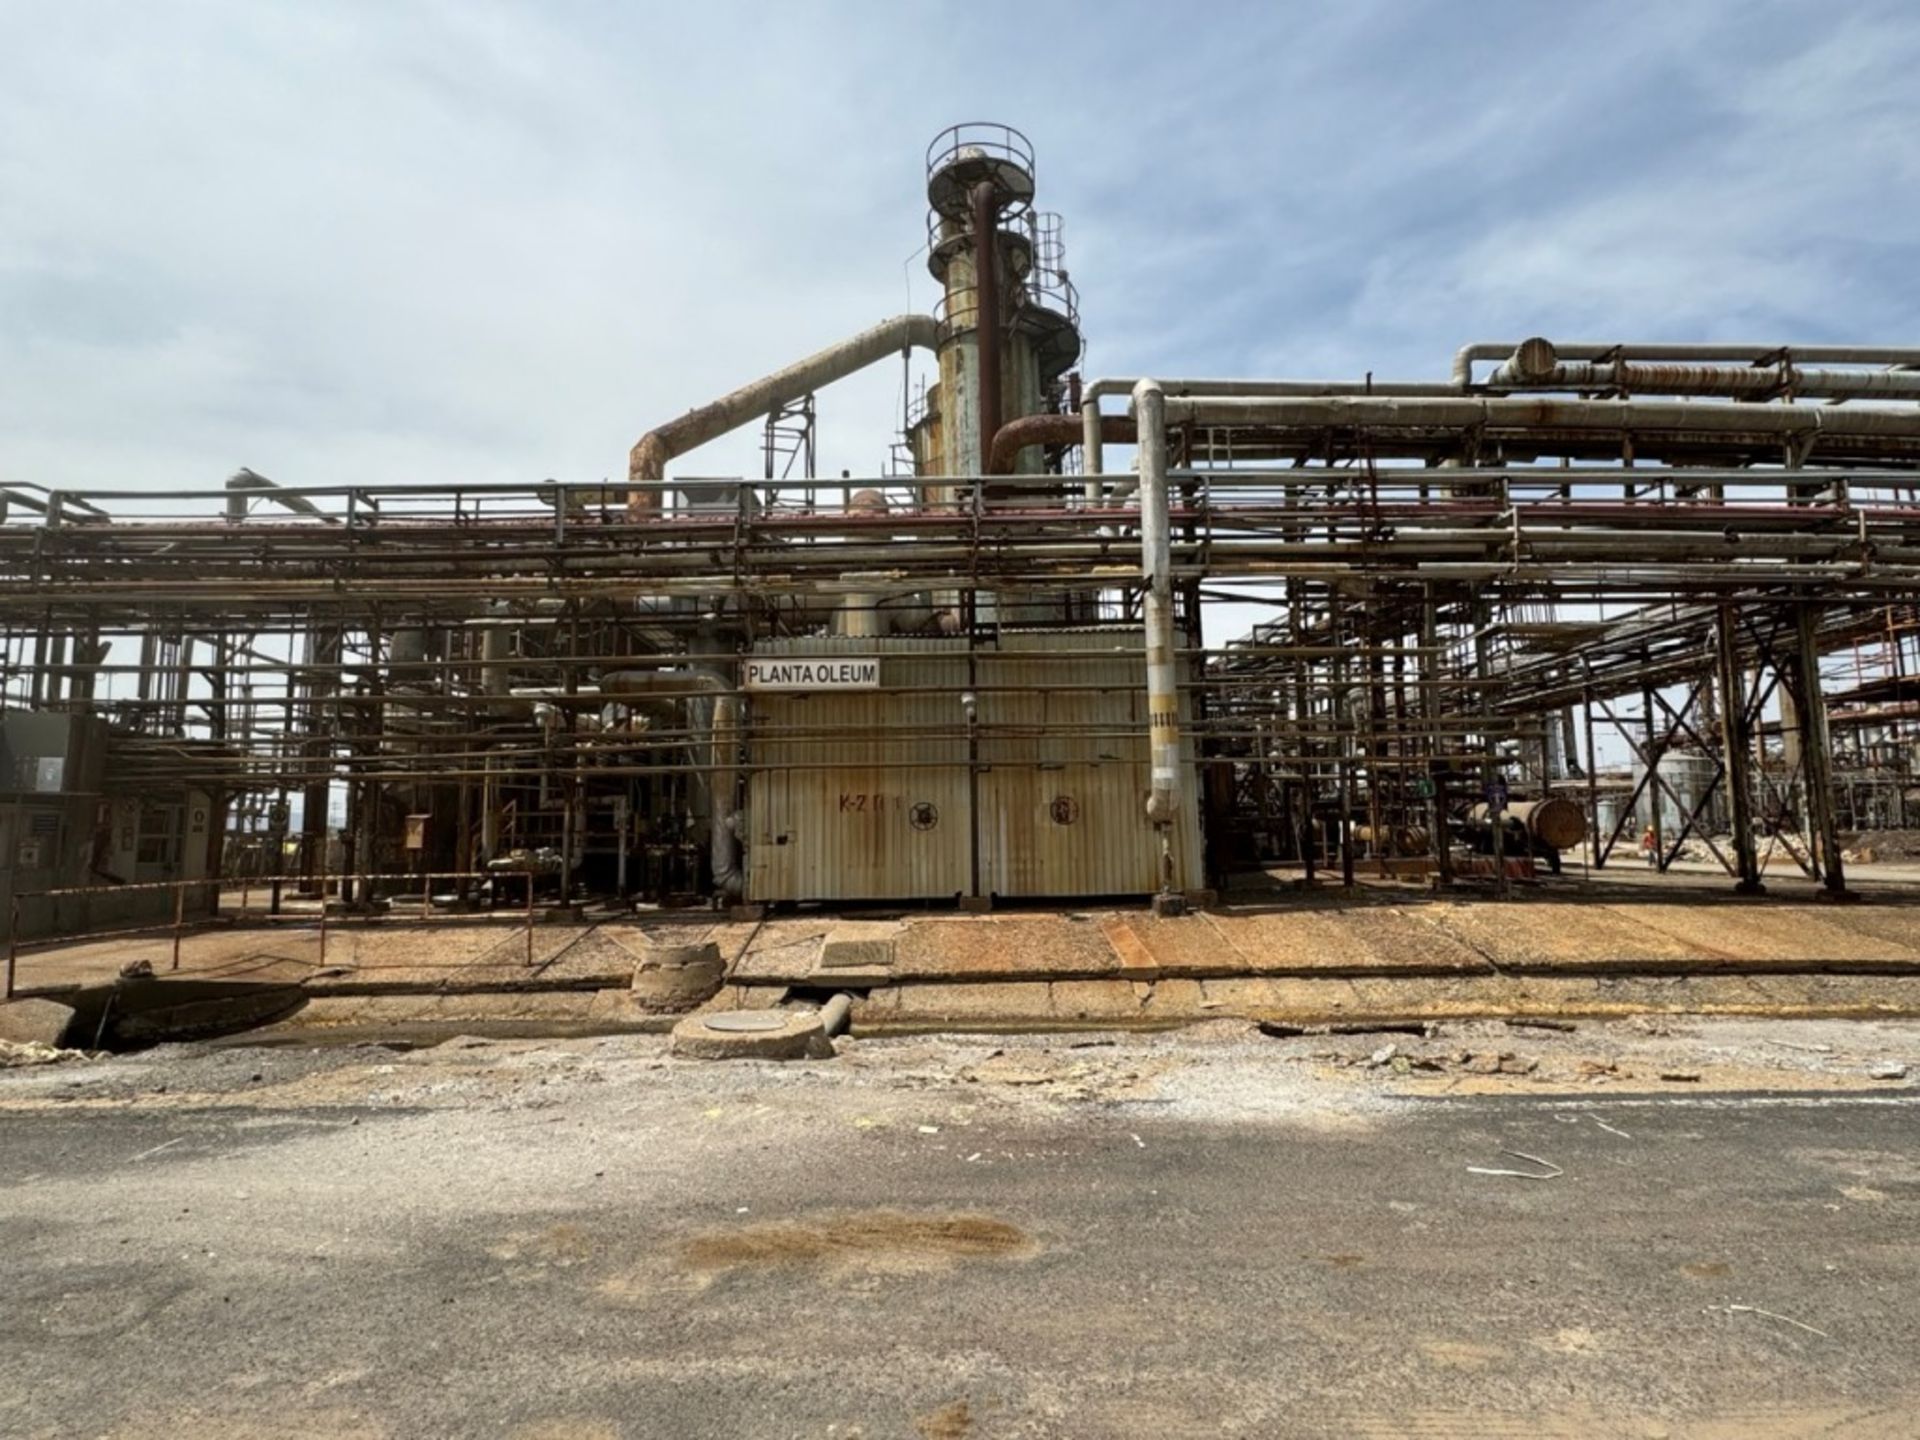 Complete industrial plant for chemical process of obtaining OLEUM, with a capacity to produce 117,2